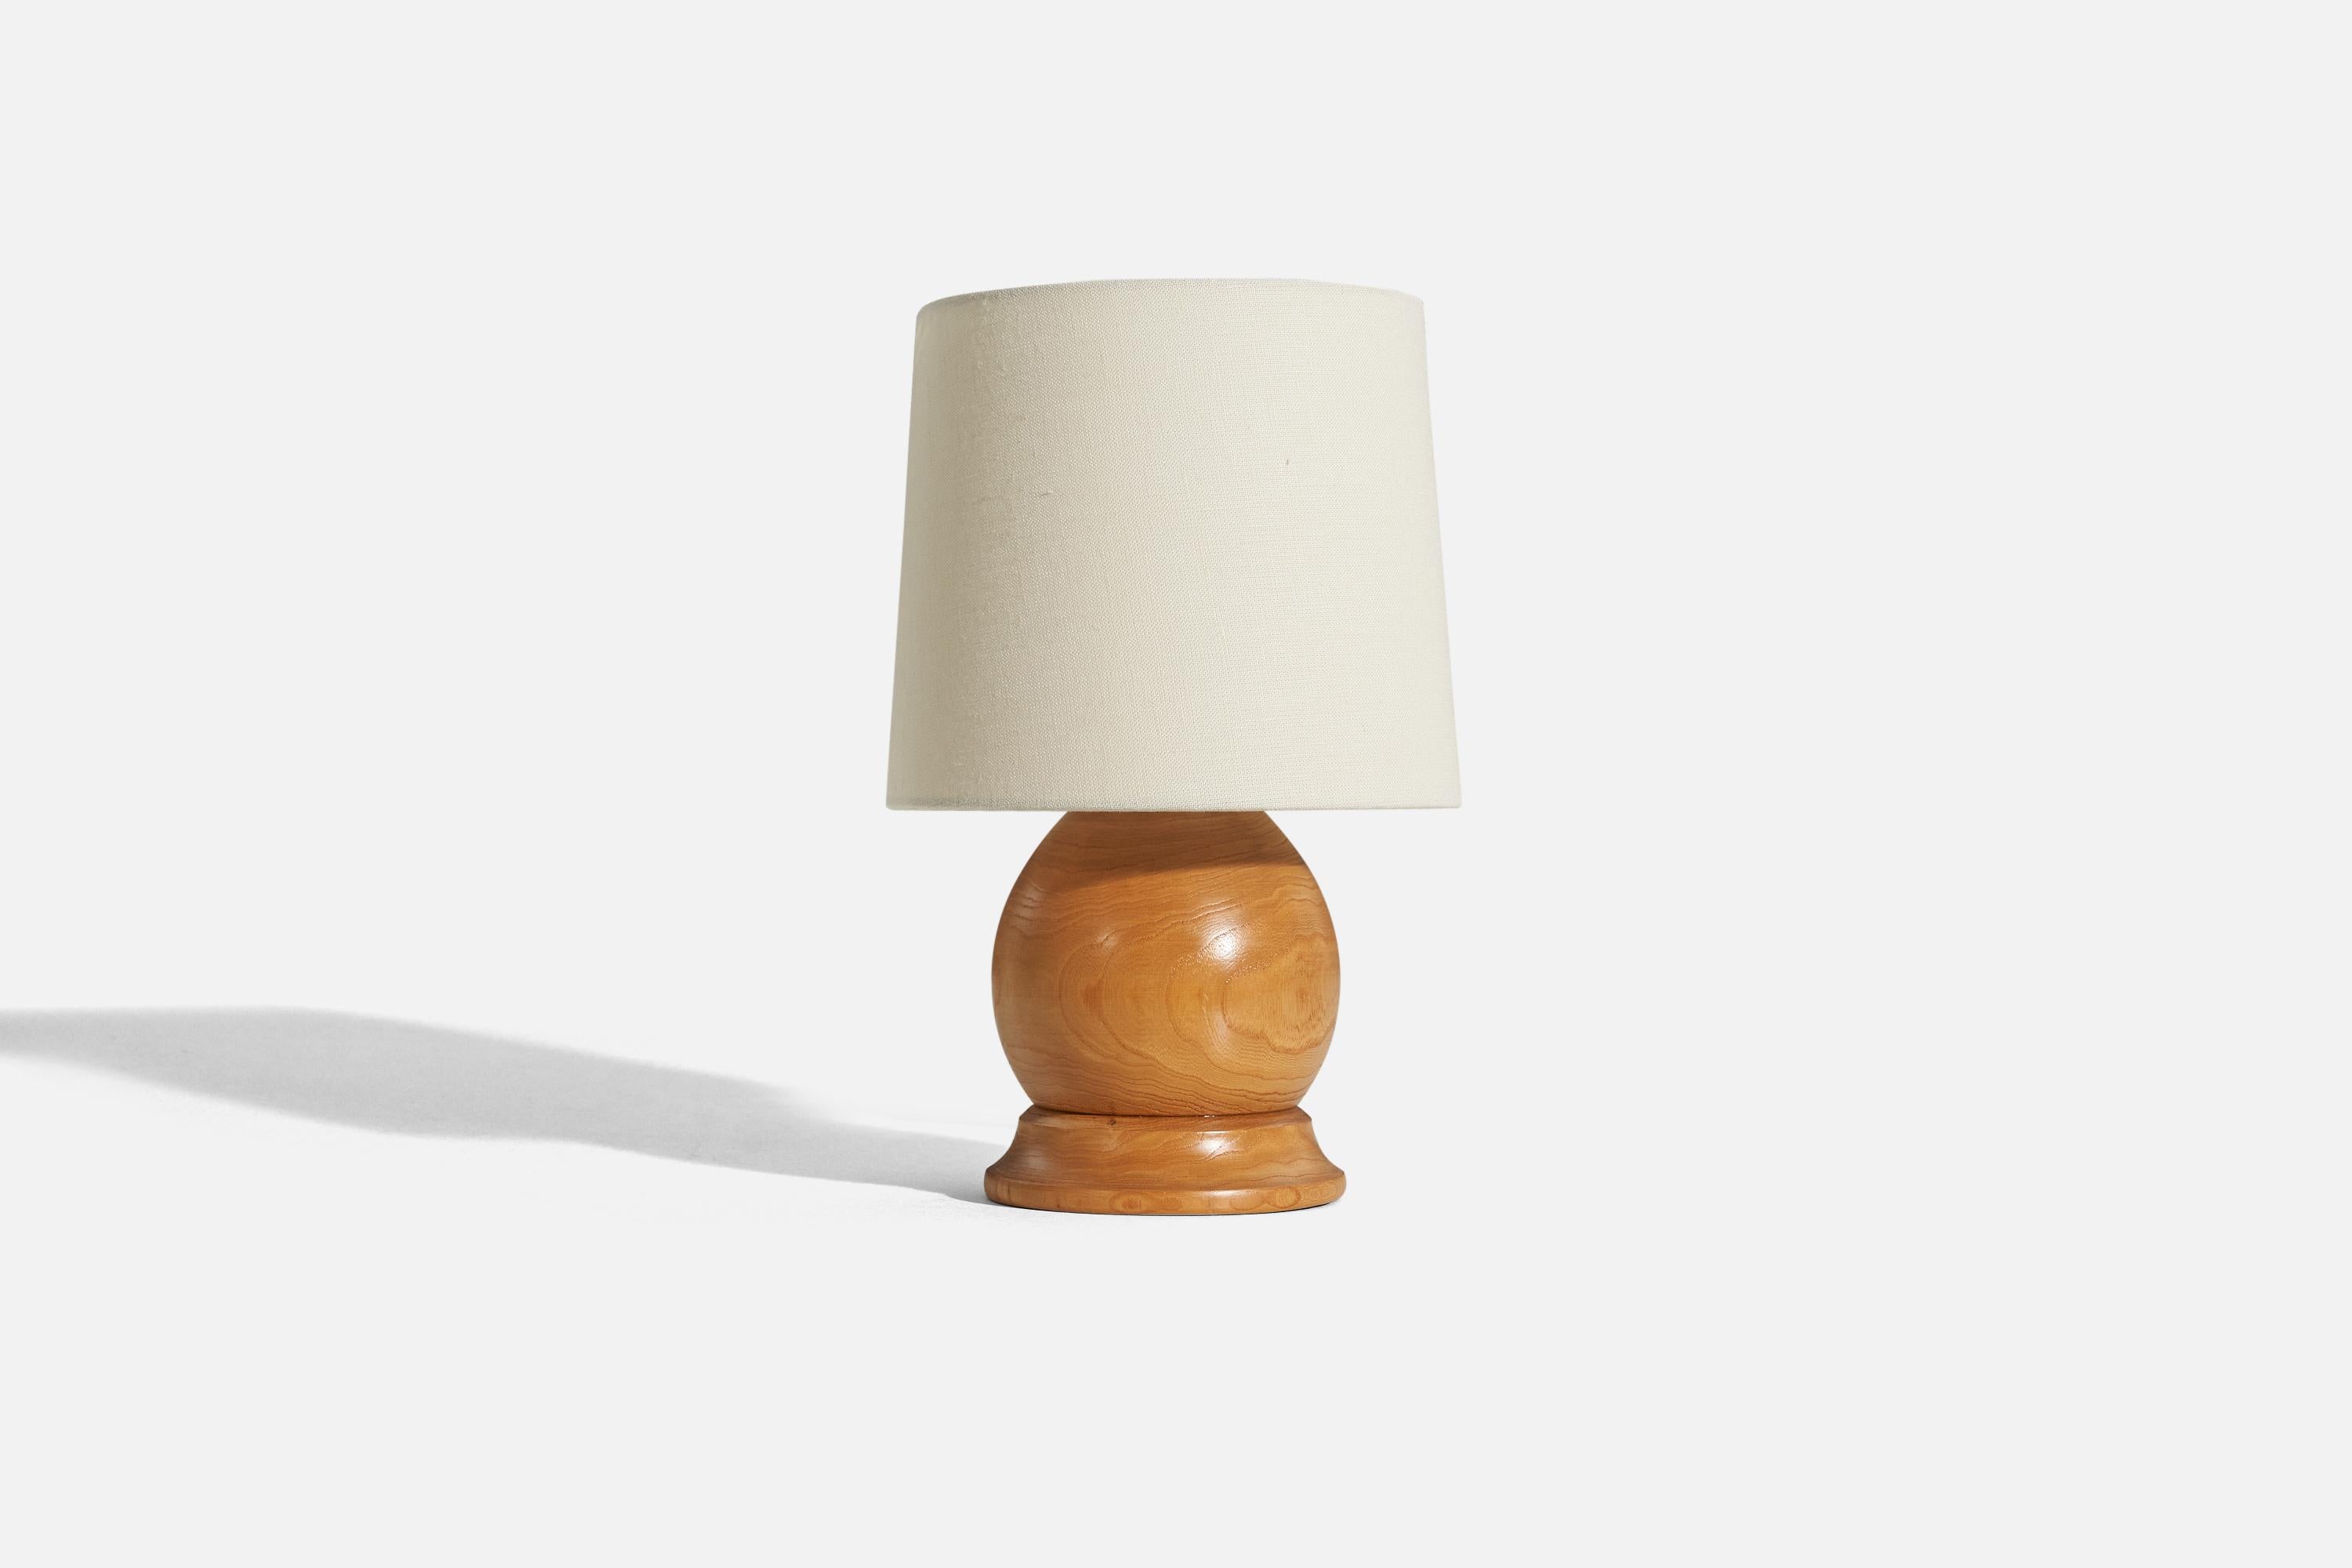 A solid pine table lamp designed and produced by a S.P. Slöjd, Sweden, 1970s.

Sold without lampshade. 
Dimensions of Lamp (inches) : 8.125 x 5.125 x 5.125 (H x W x D)
Dimensions of Shade (inches) : 7 x 8 x 7 (T x B x H)
Dimension of Lamp with